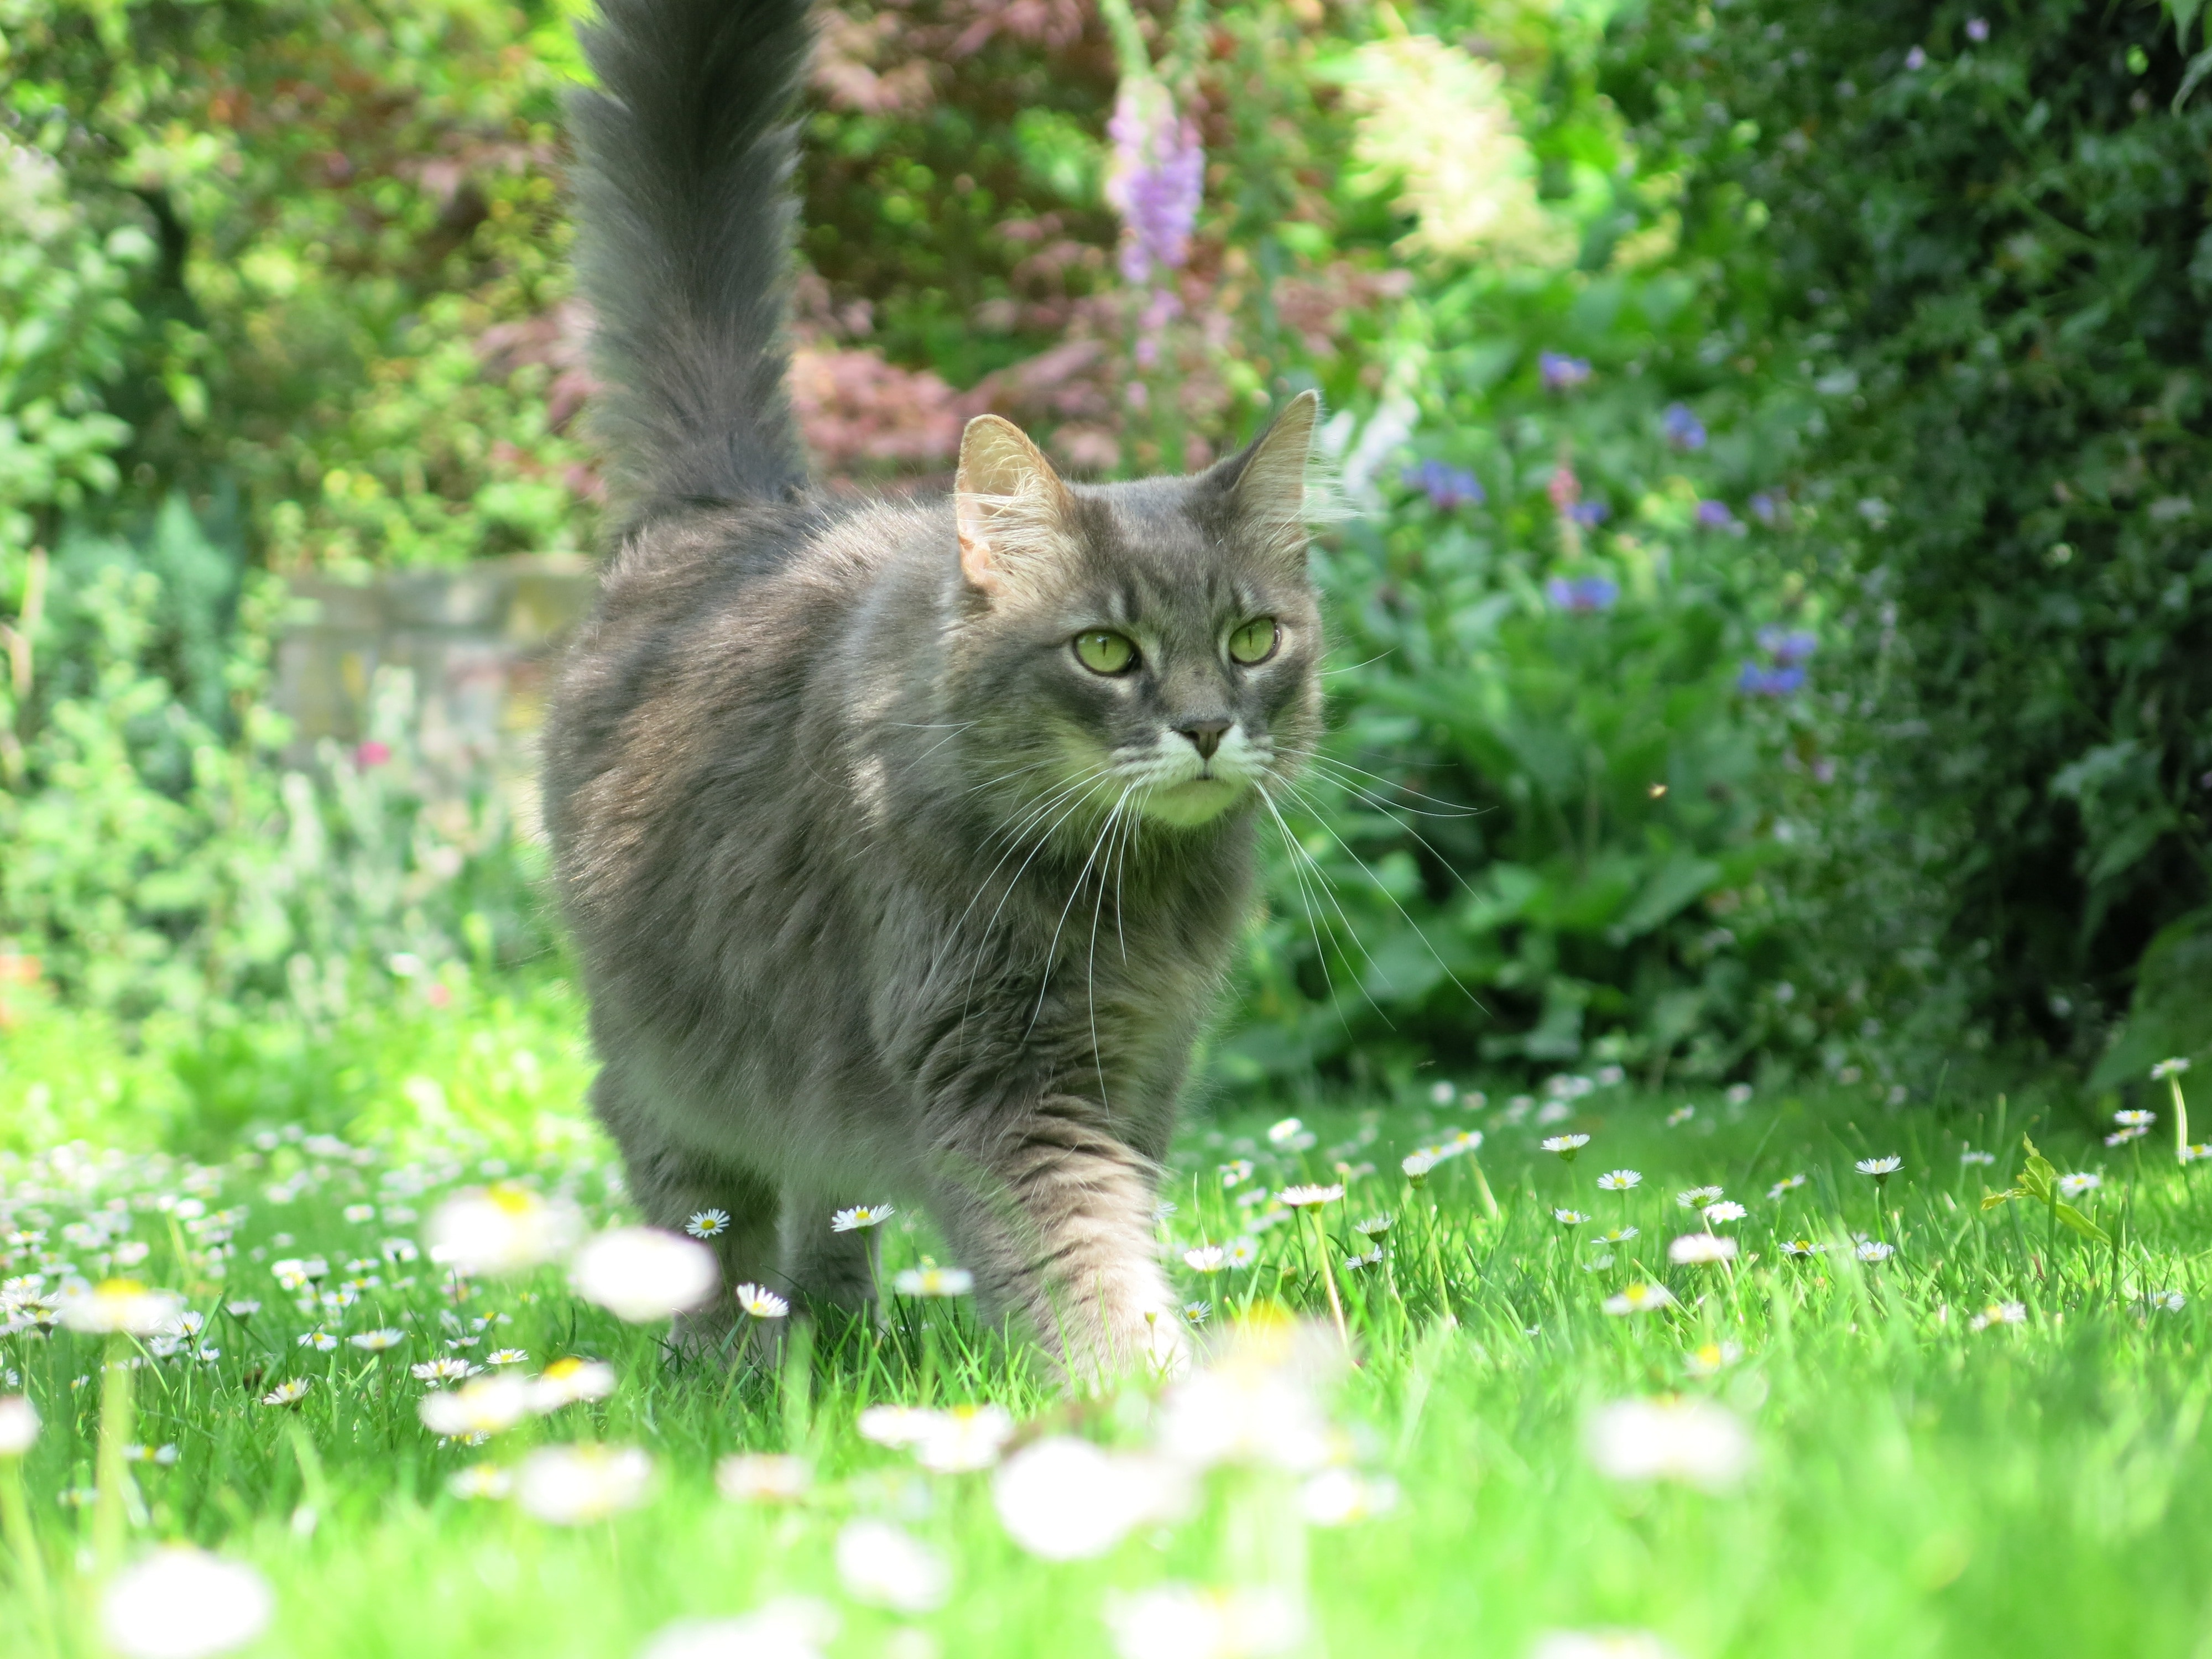 silver tabby cat surround by green leaf plant and flowers